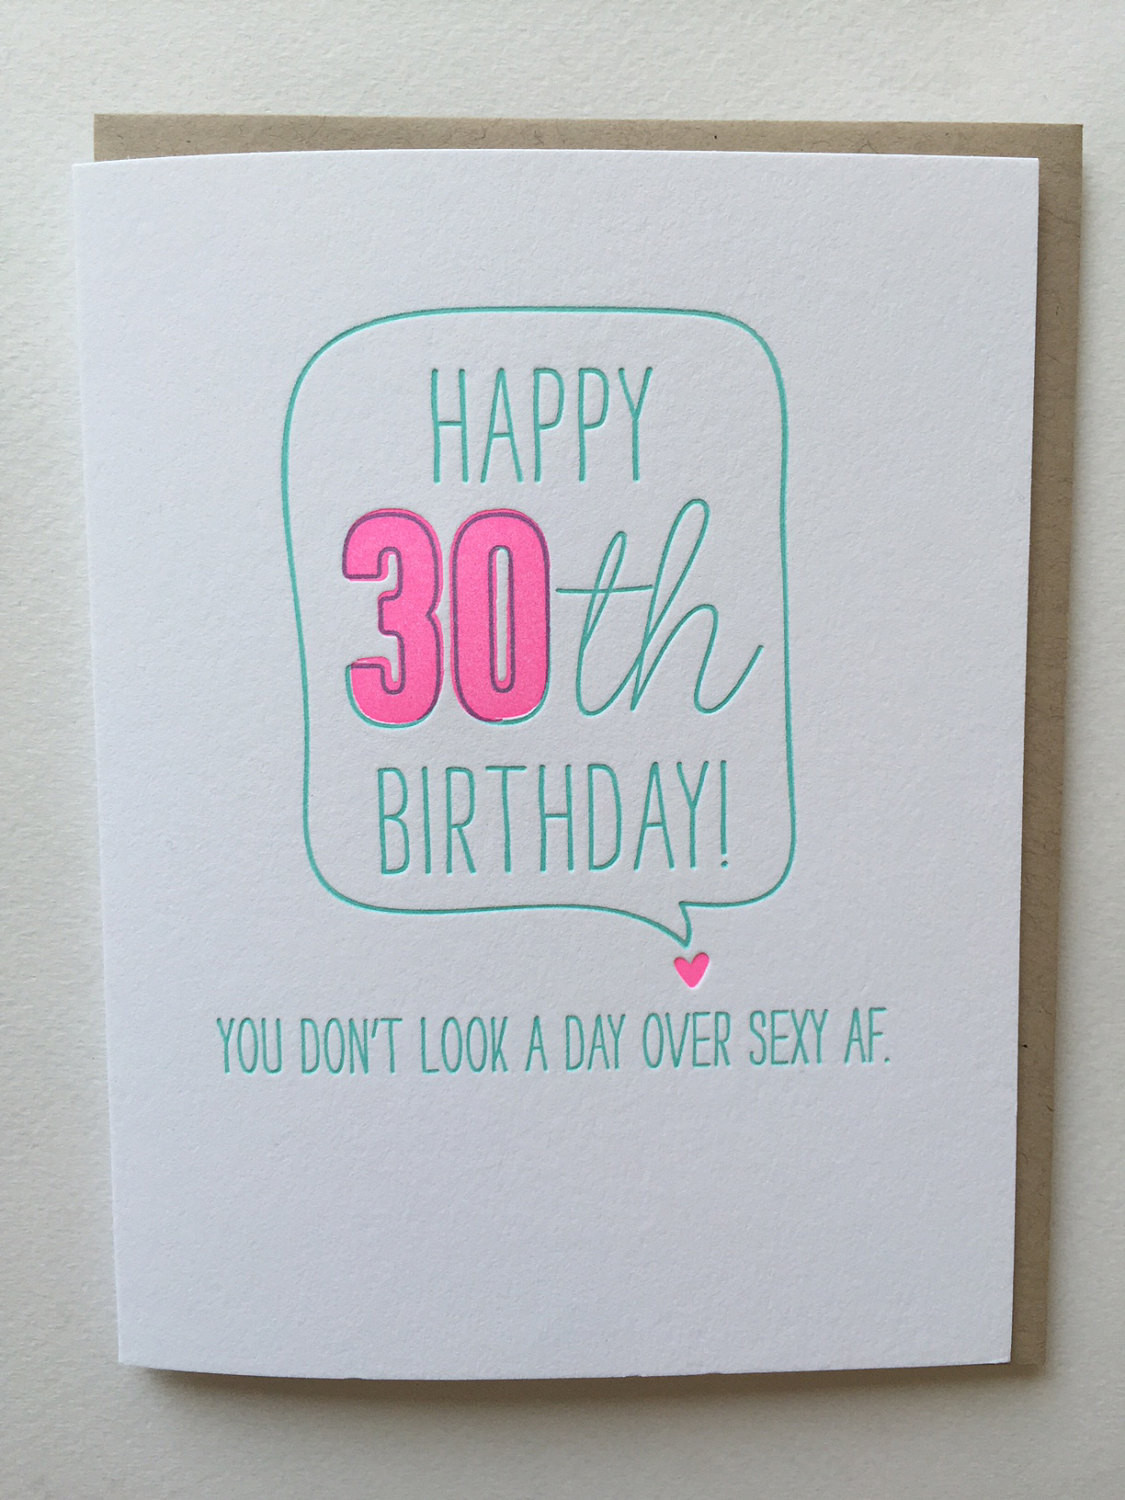 30th Birthday Card Messages
 30th birthday card Funny Card for 30th birthday Letterpress